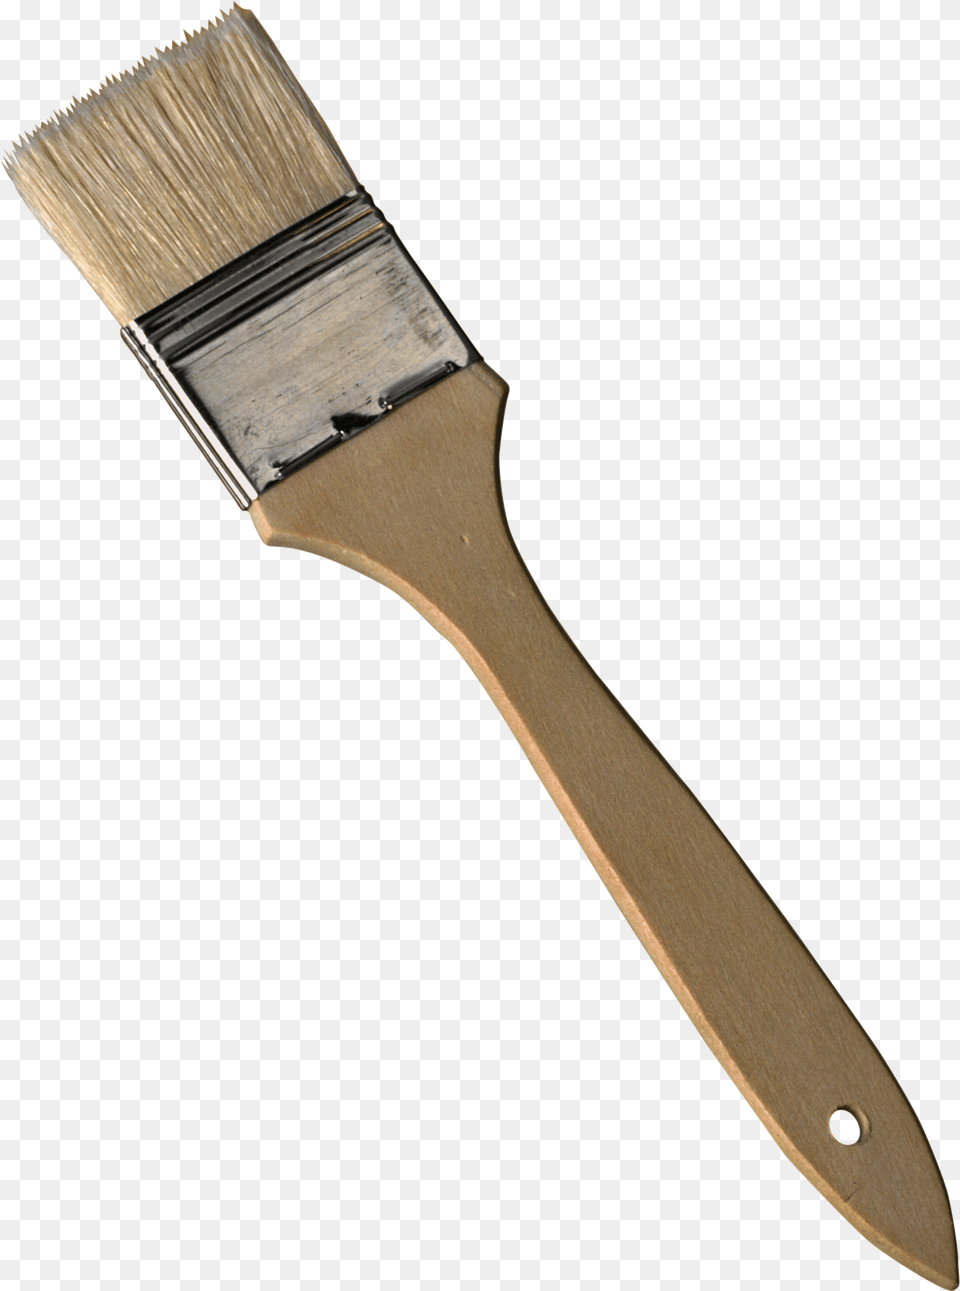 Brush, Device, Tool Png Image